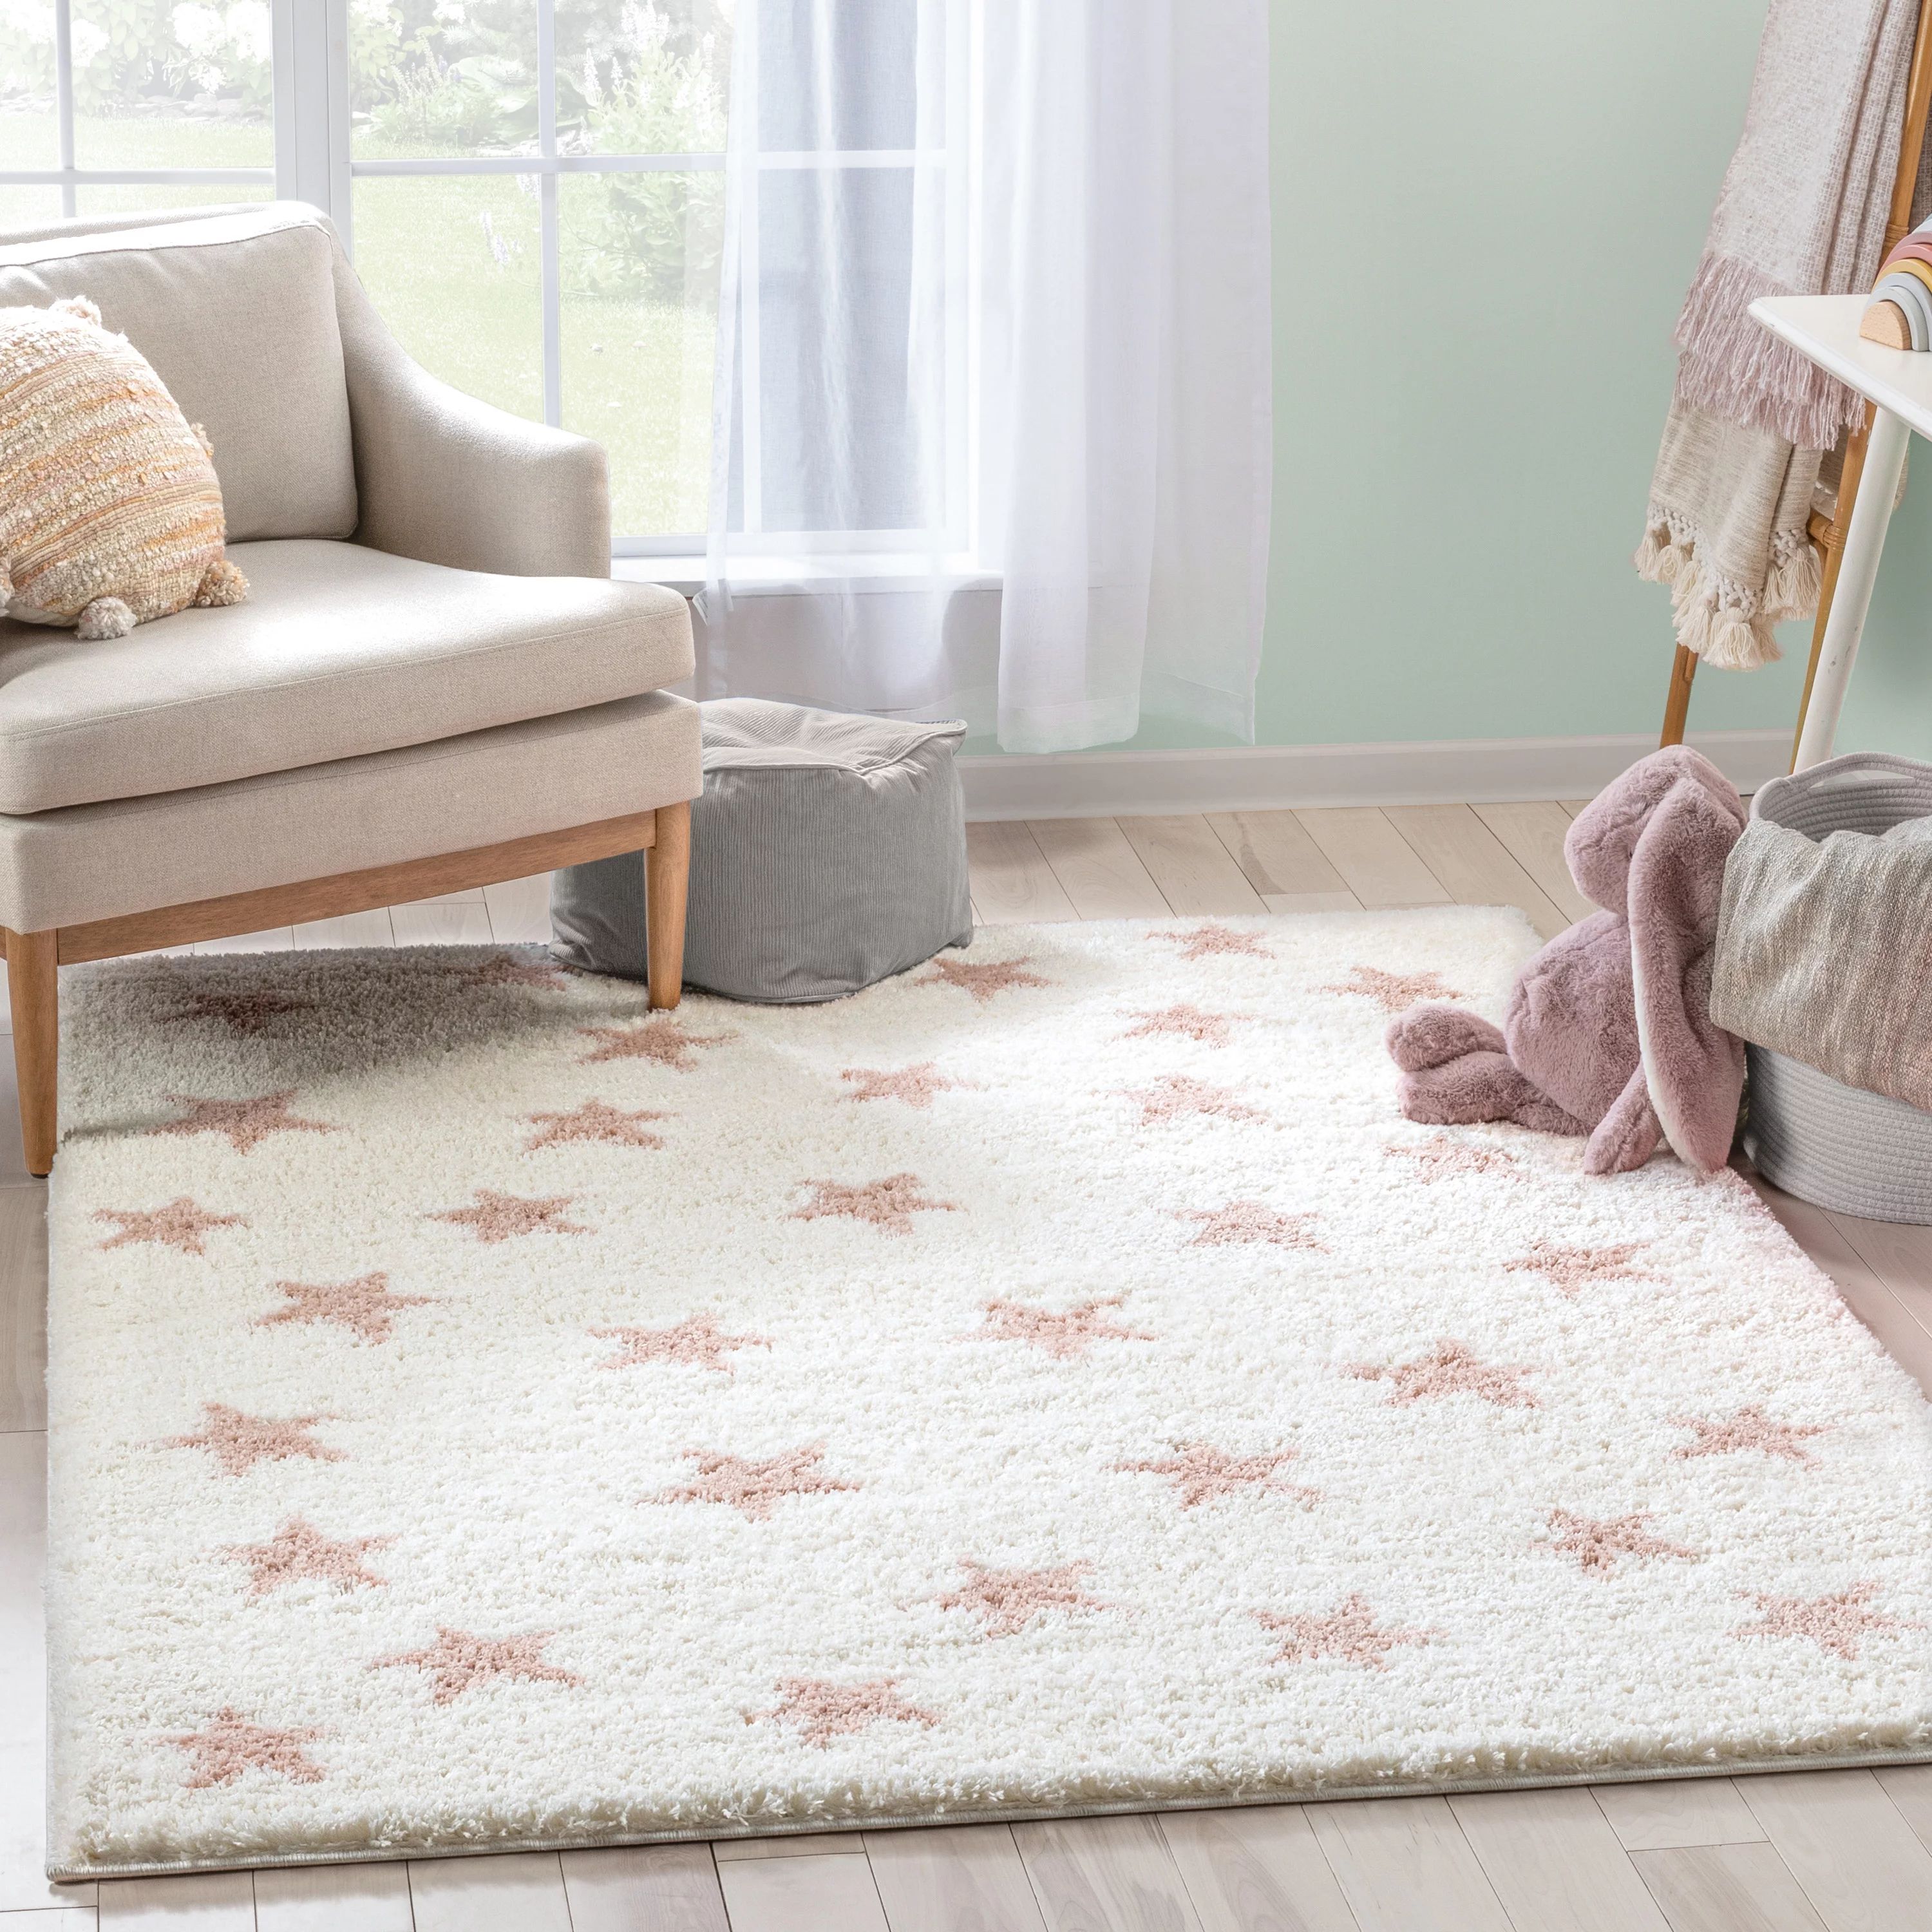 Well Woven Celestia Ivory & Pink Stars Pattern Stain-resistant Area Rug 5x7 (5'3" x 7'3") | Walmart (US)